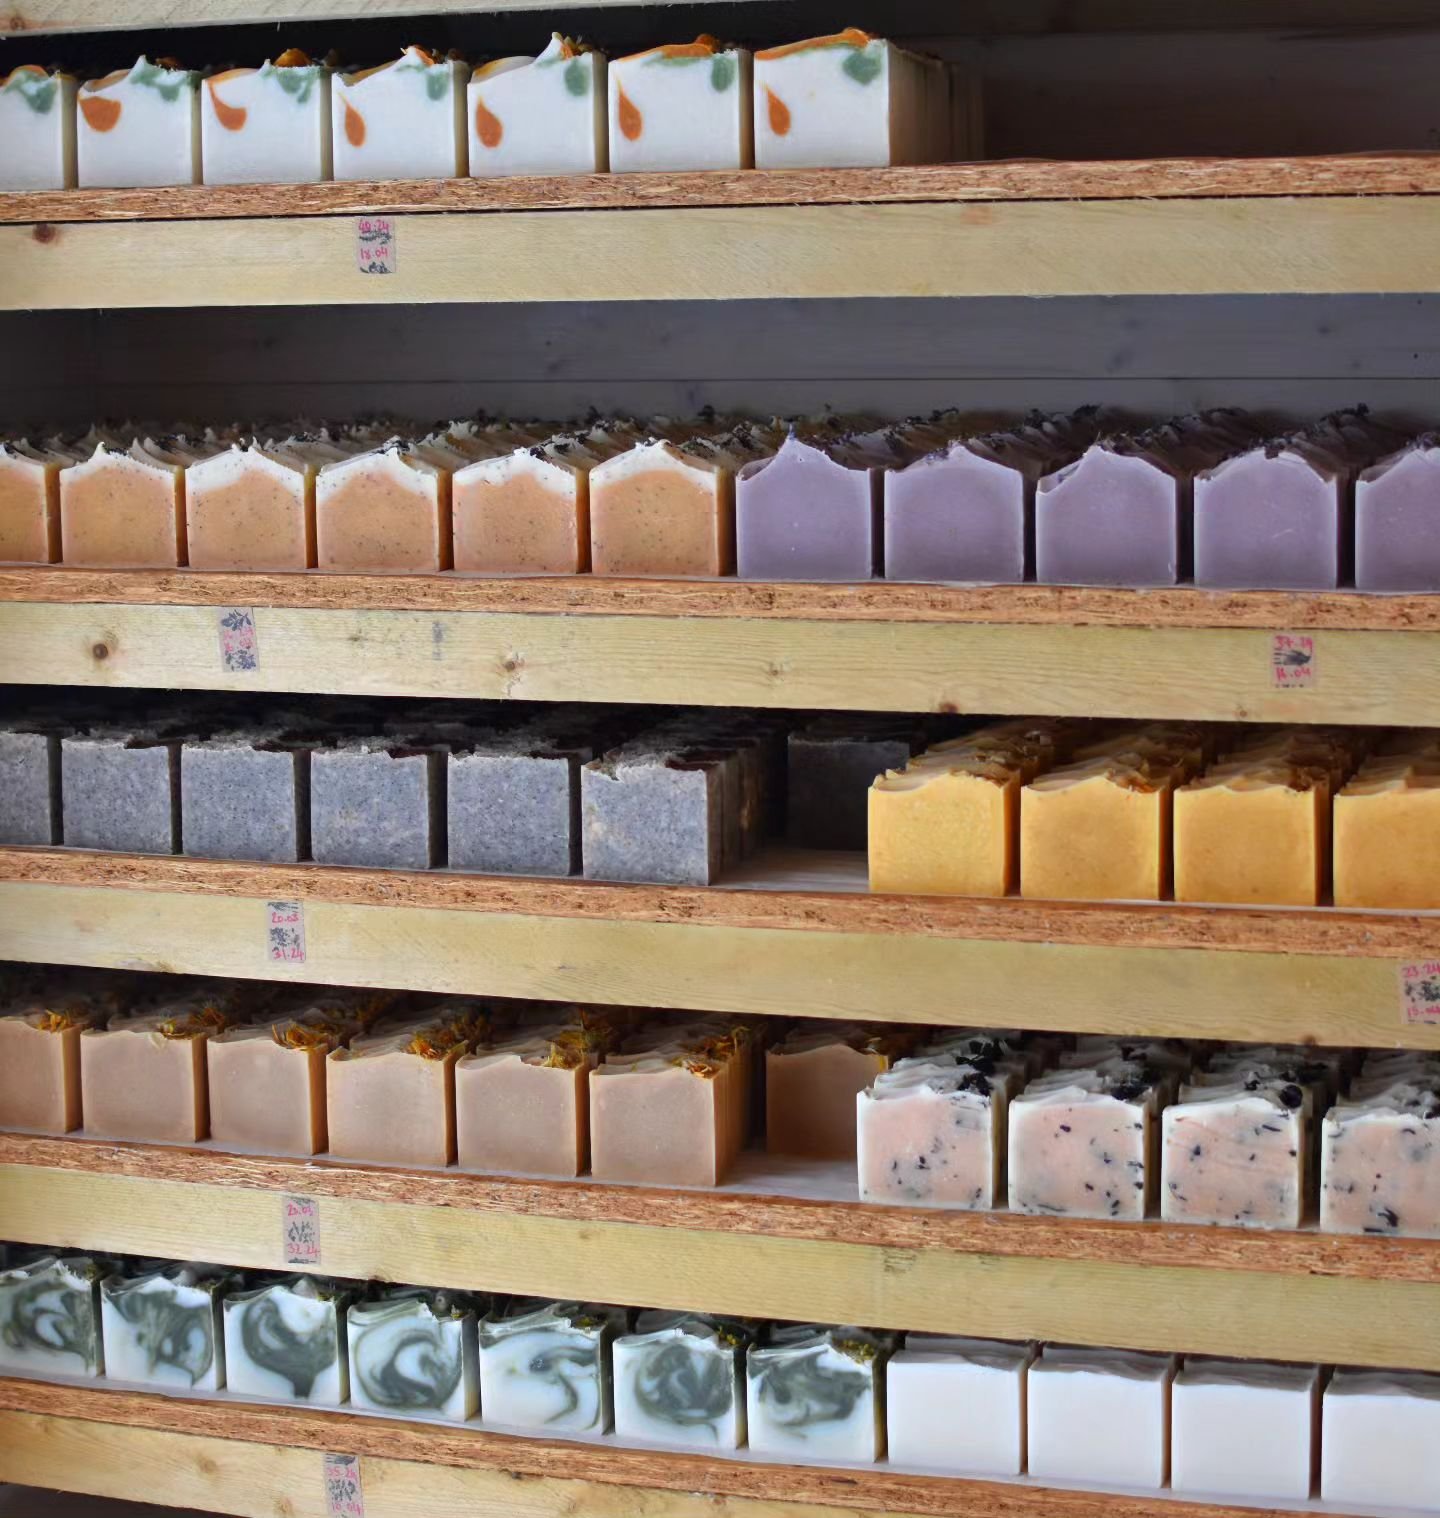 I love a good #soapshelfie It's very satisfying to see soap on the curing shelves again. It had gotten very empty there for a while.

#botanicalsoap #colouredbynature #irishsoapmaker